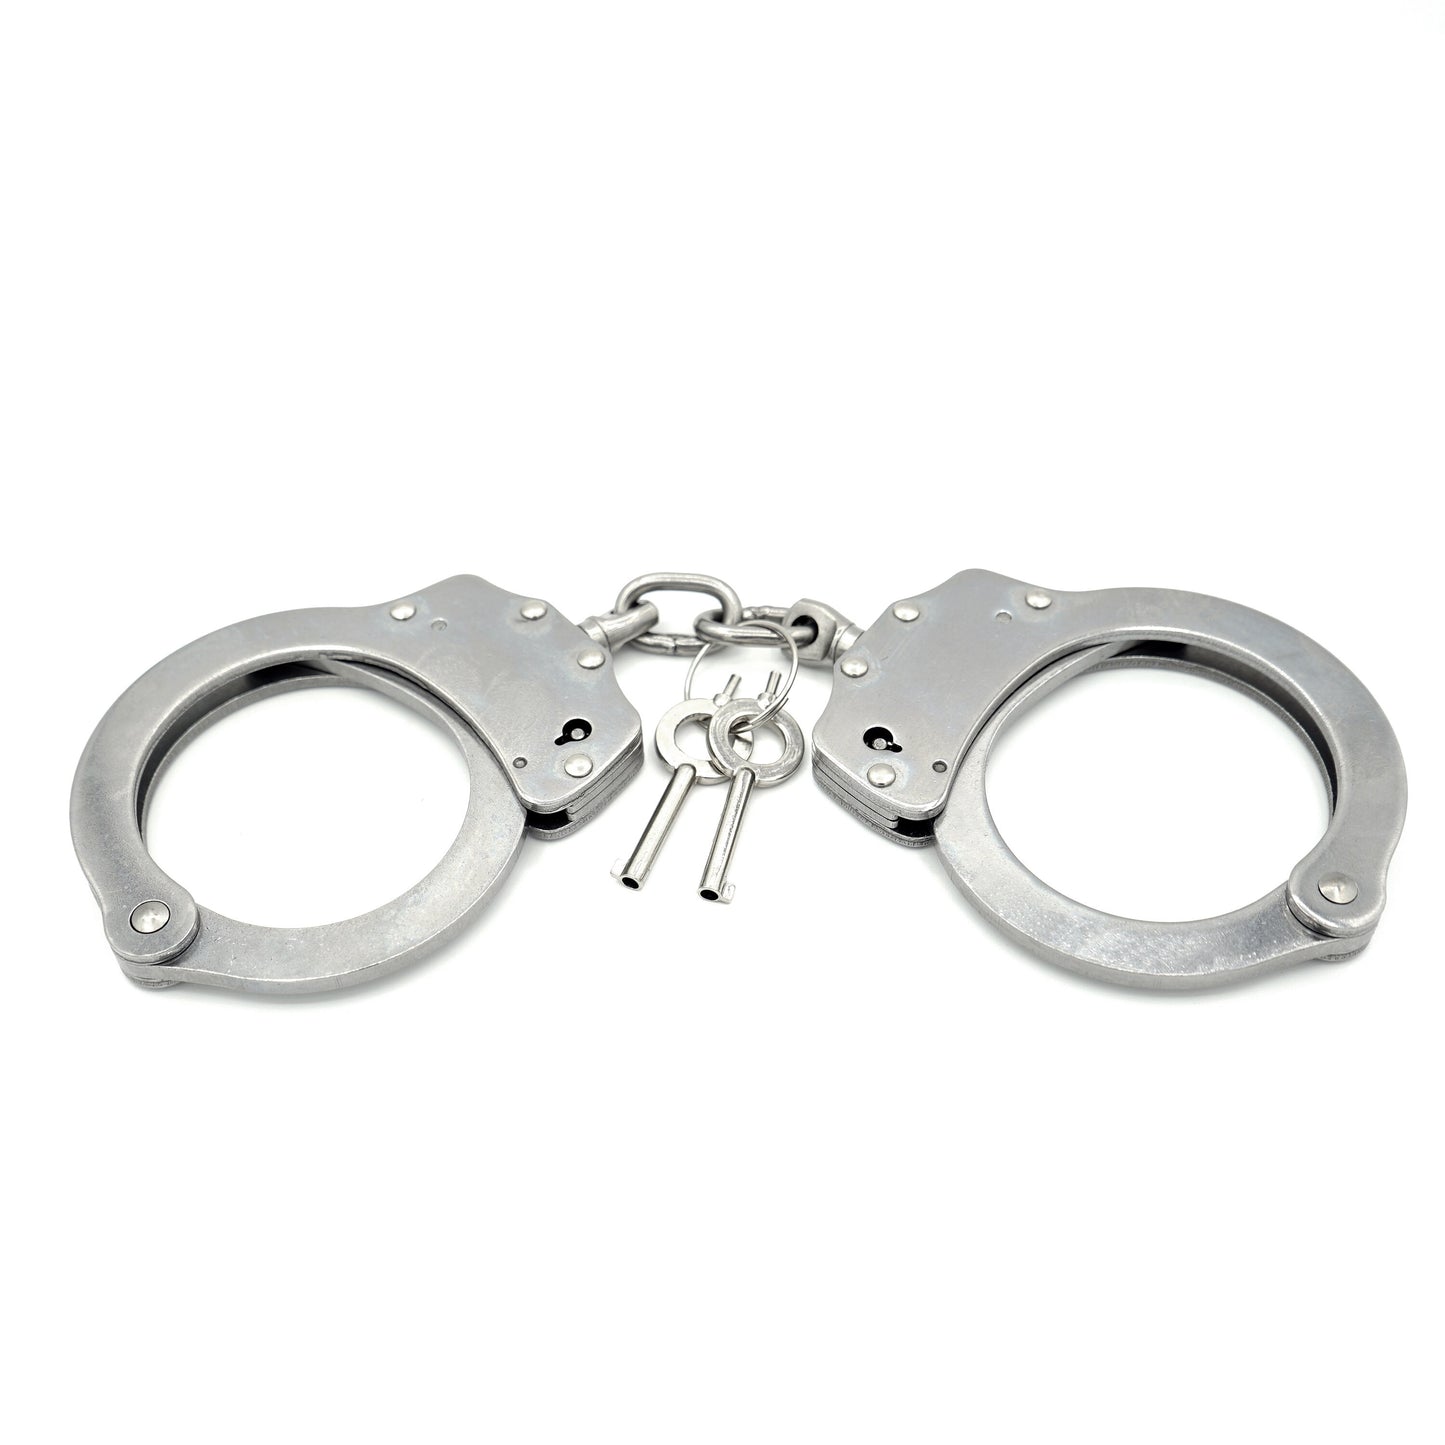 High quality police handcuffs with chain